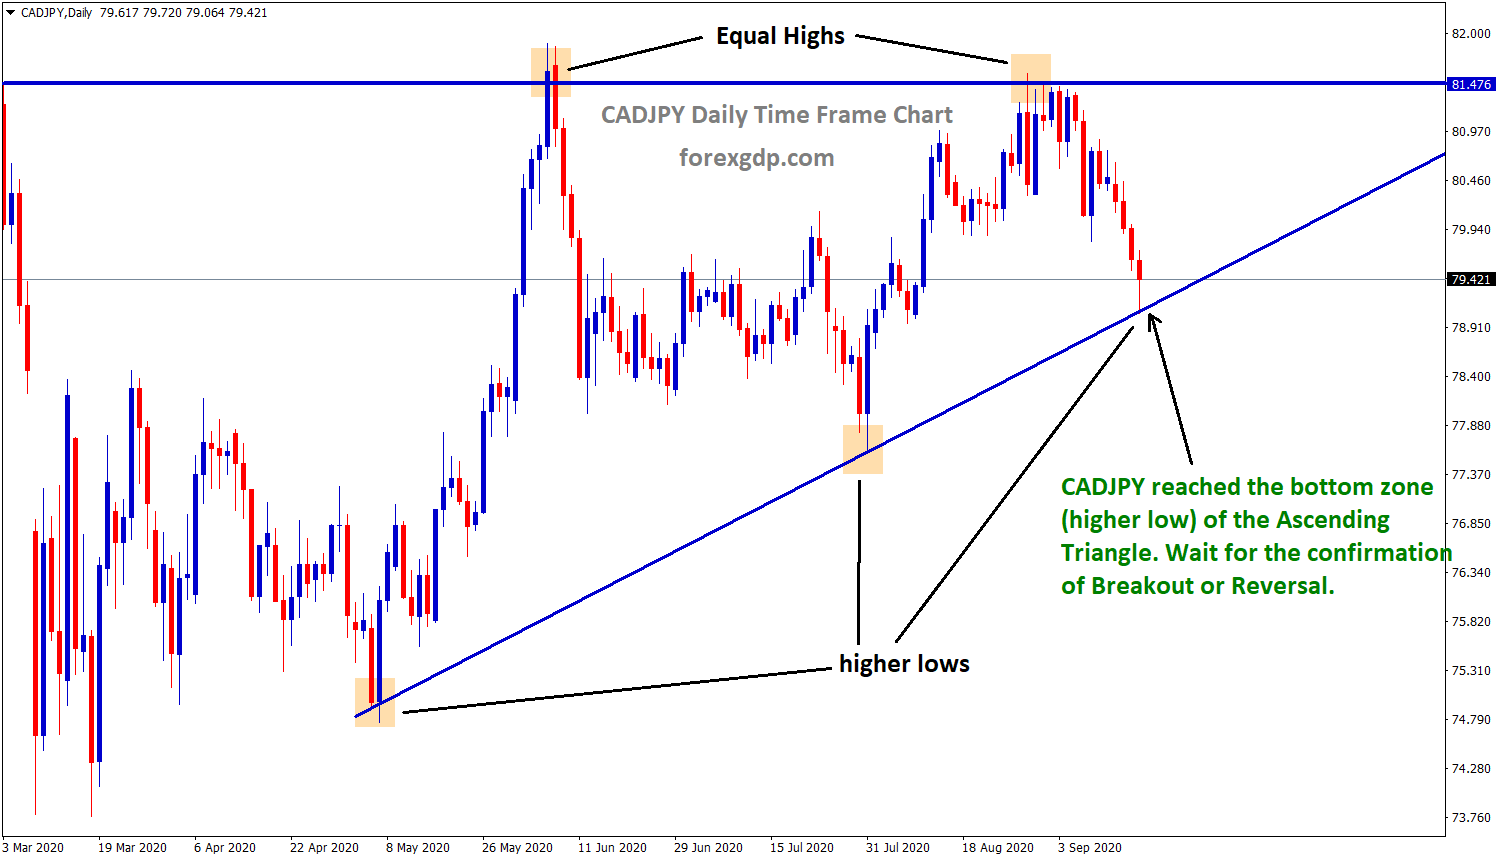 cadjpy reached the bottom zone of the ascending triangle